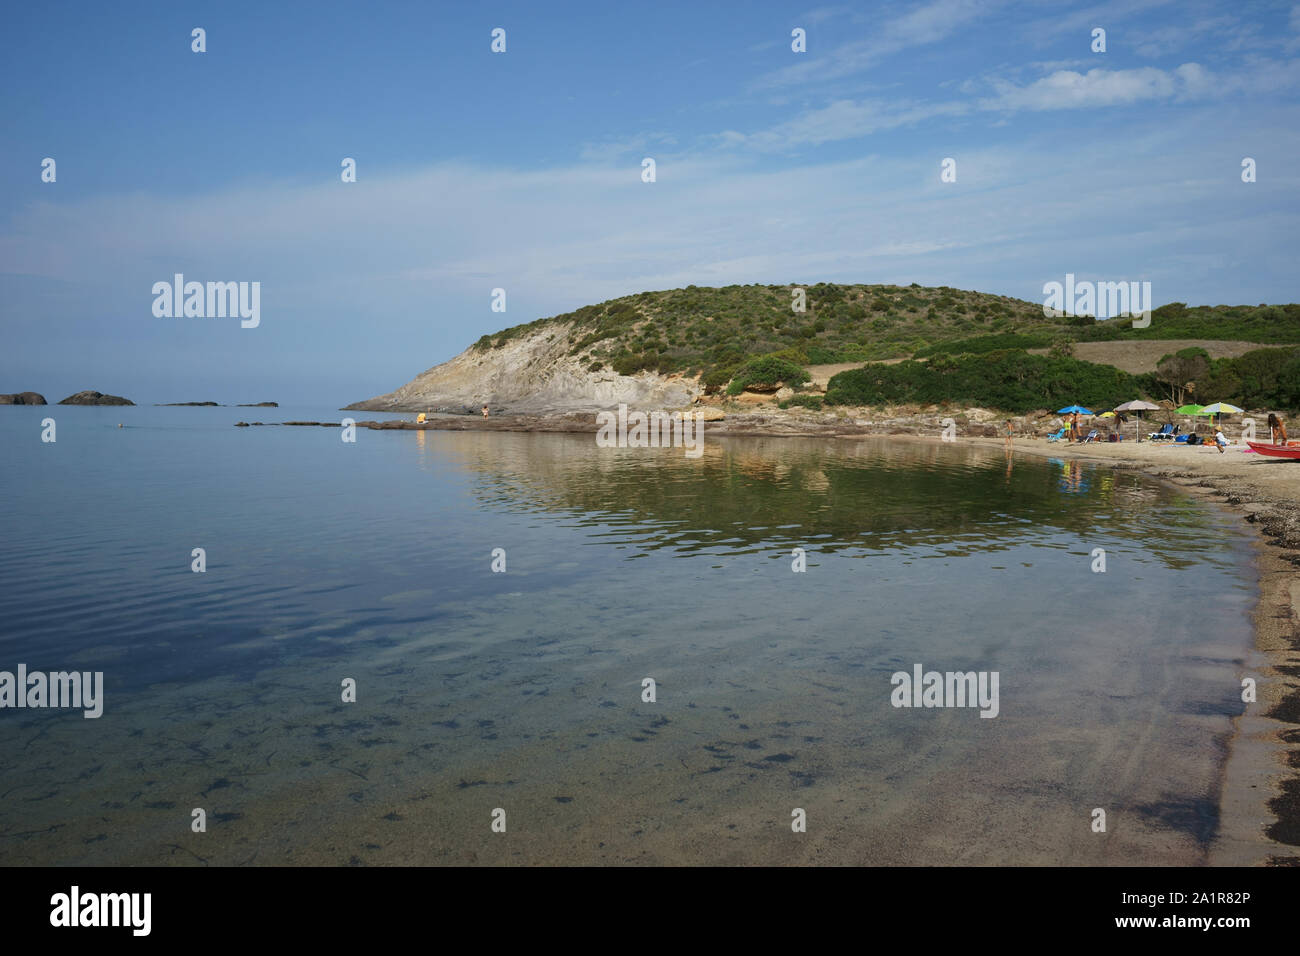 Cala Sapone High Resolution Stock Photography and Images - Alamy